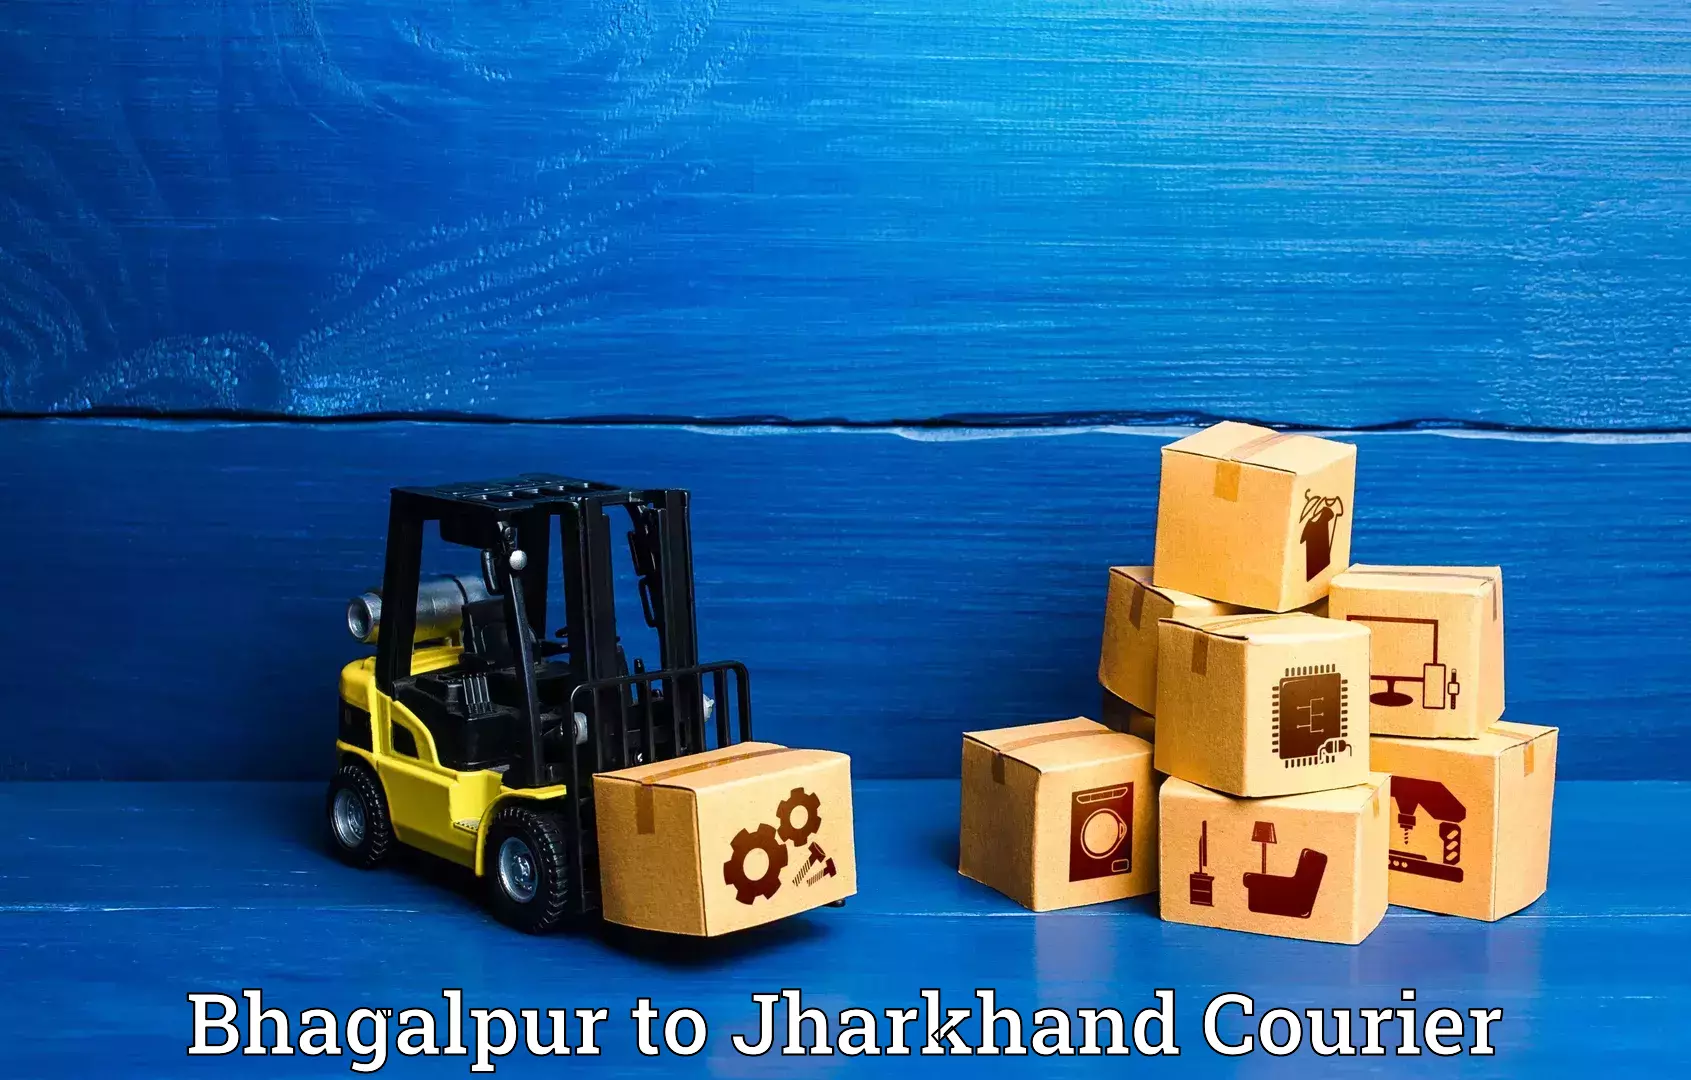 Baggage shipping experience Bhagalpur to IIIT Ranchi